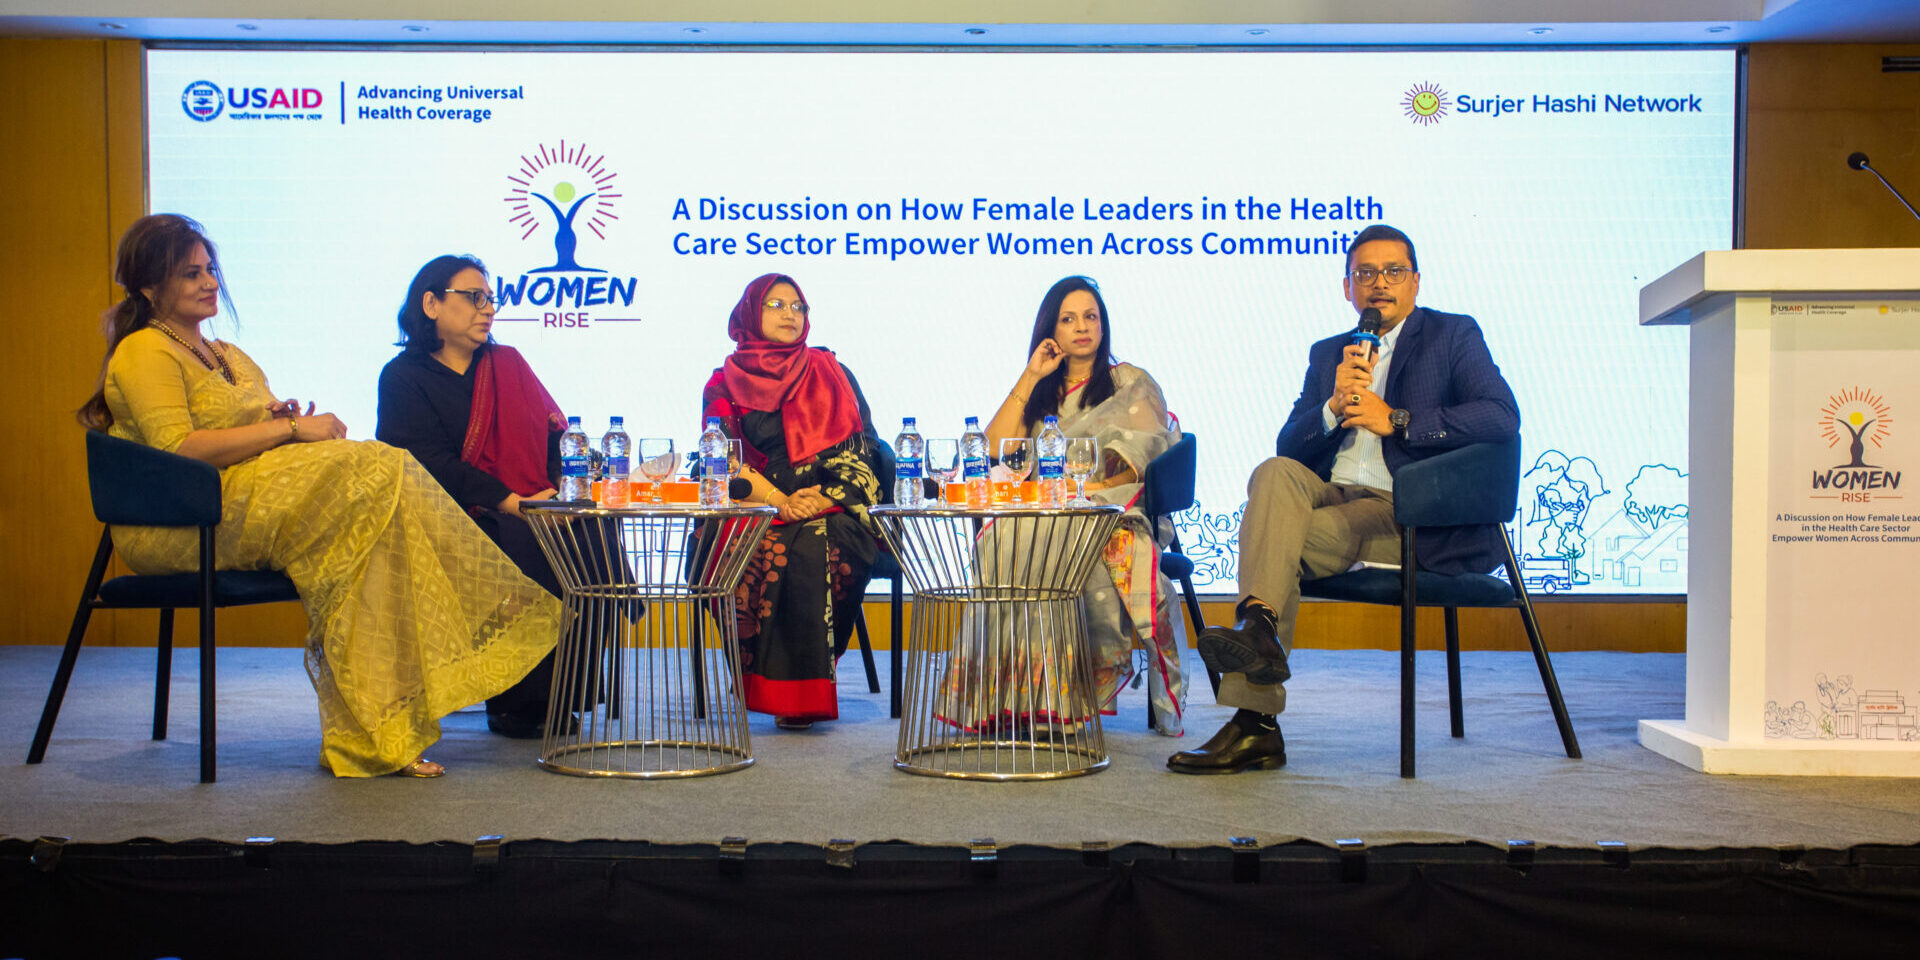 Panelists seated at the Women Rise event in Bangladesh.